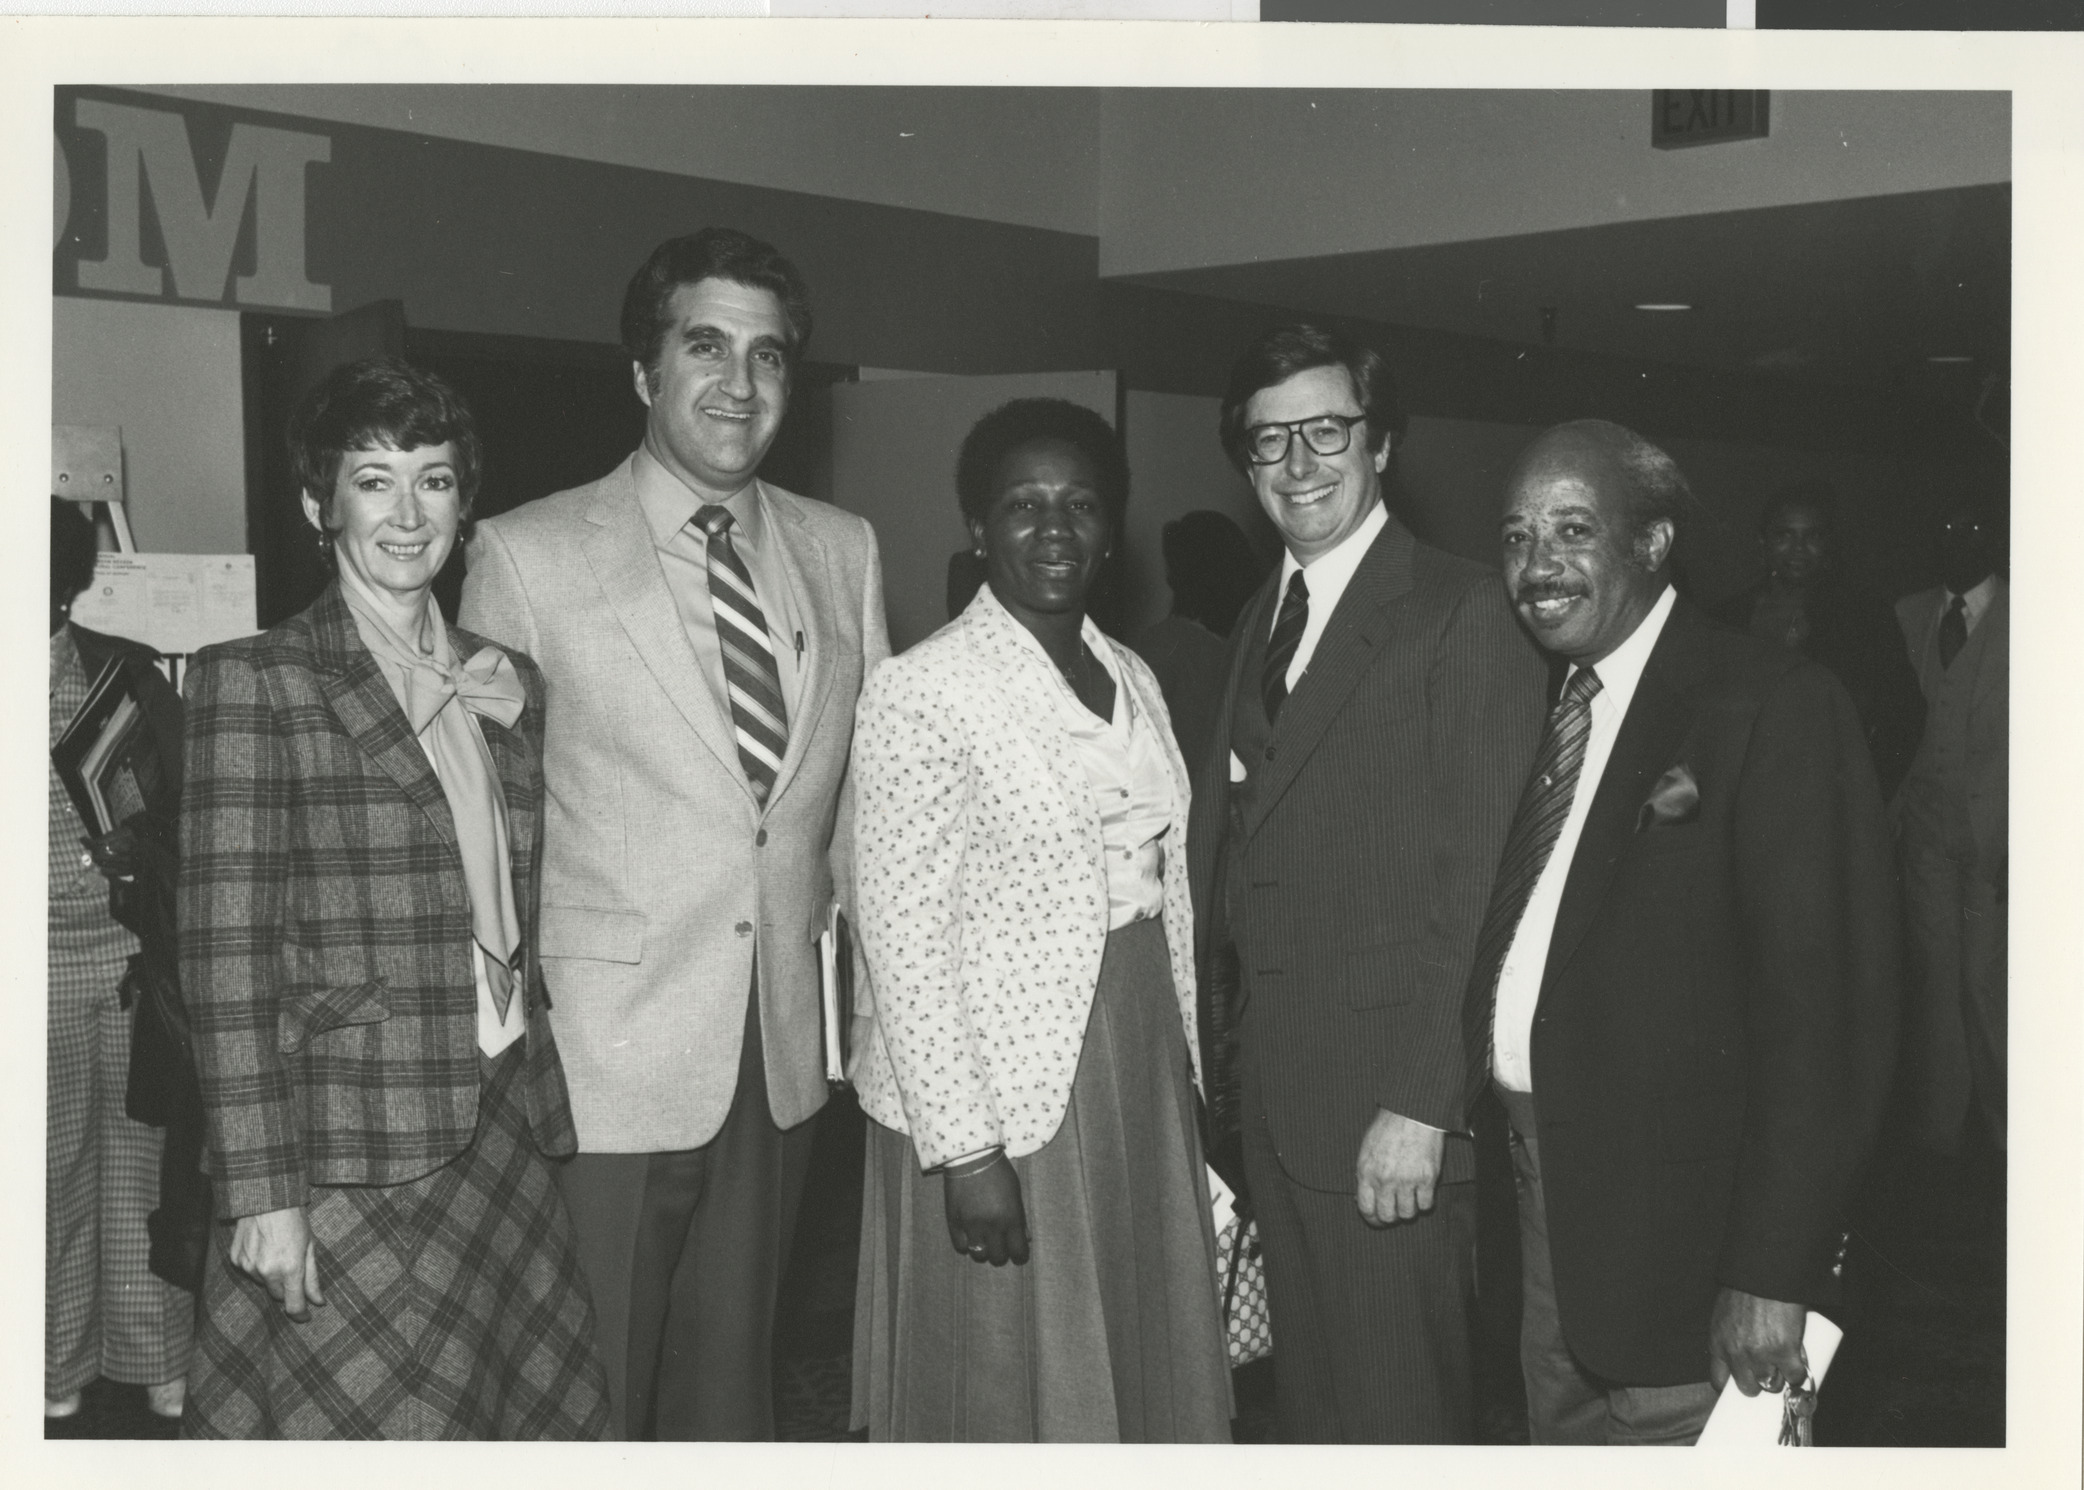 Photograph of Sandy Baxter (Governor's Office), Ron Lurie, CCSD Board Member Virginia Brewster, Governor List, and NLV Commissioner Theron Goynes